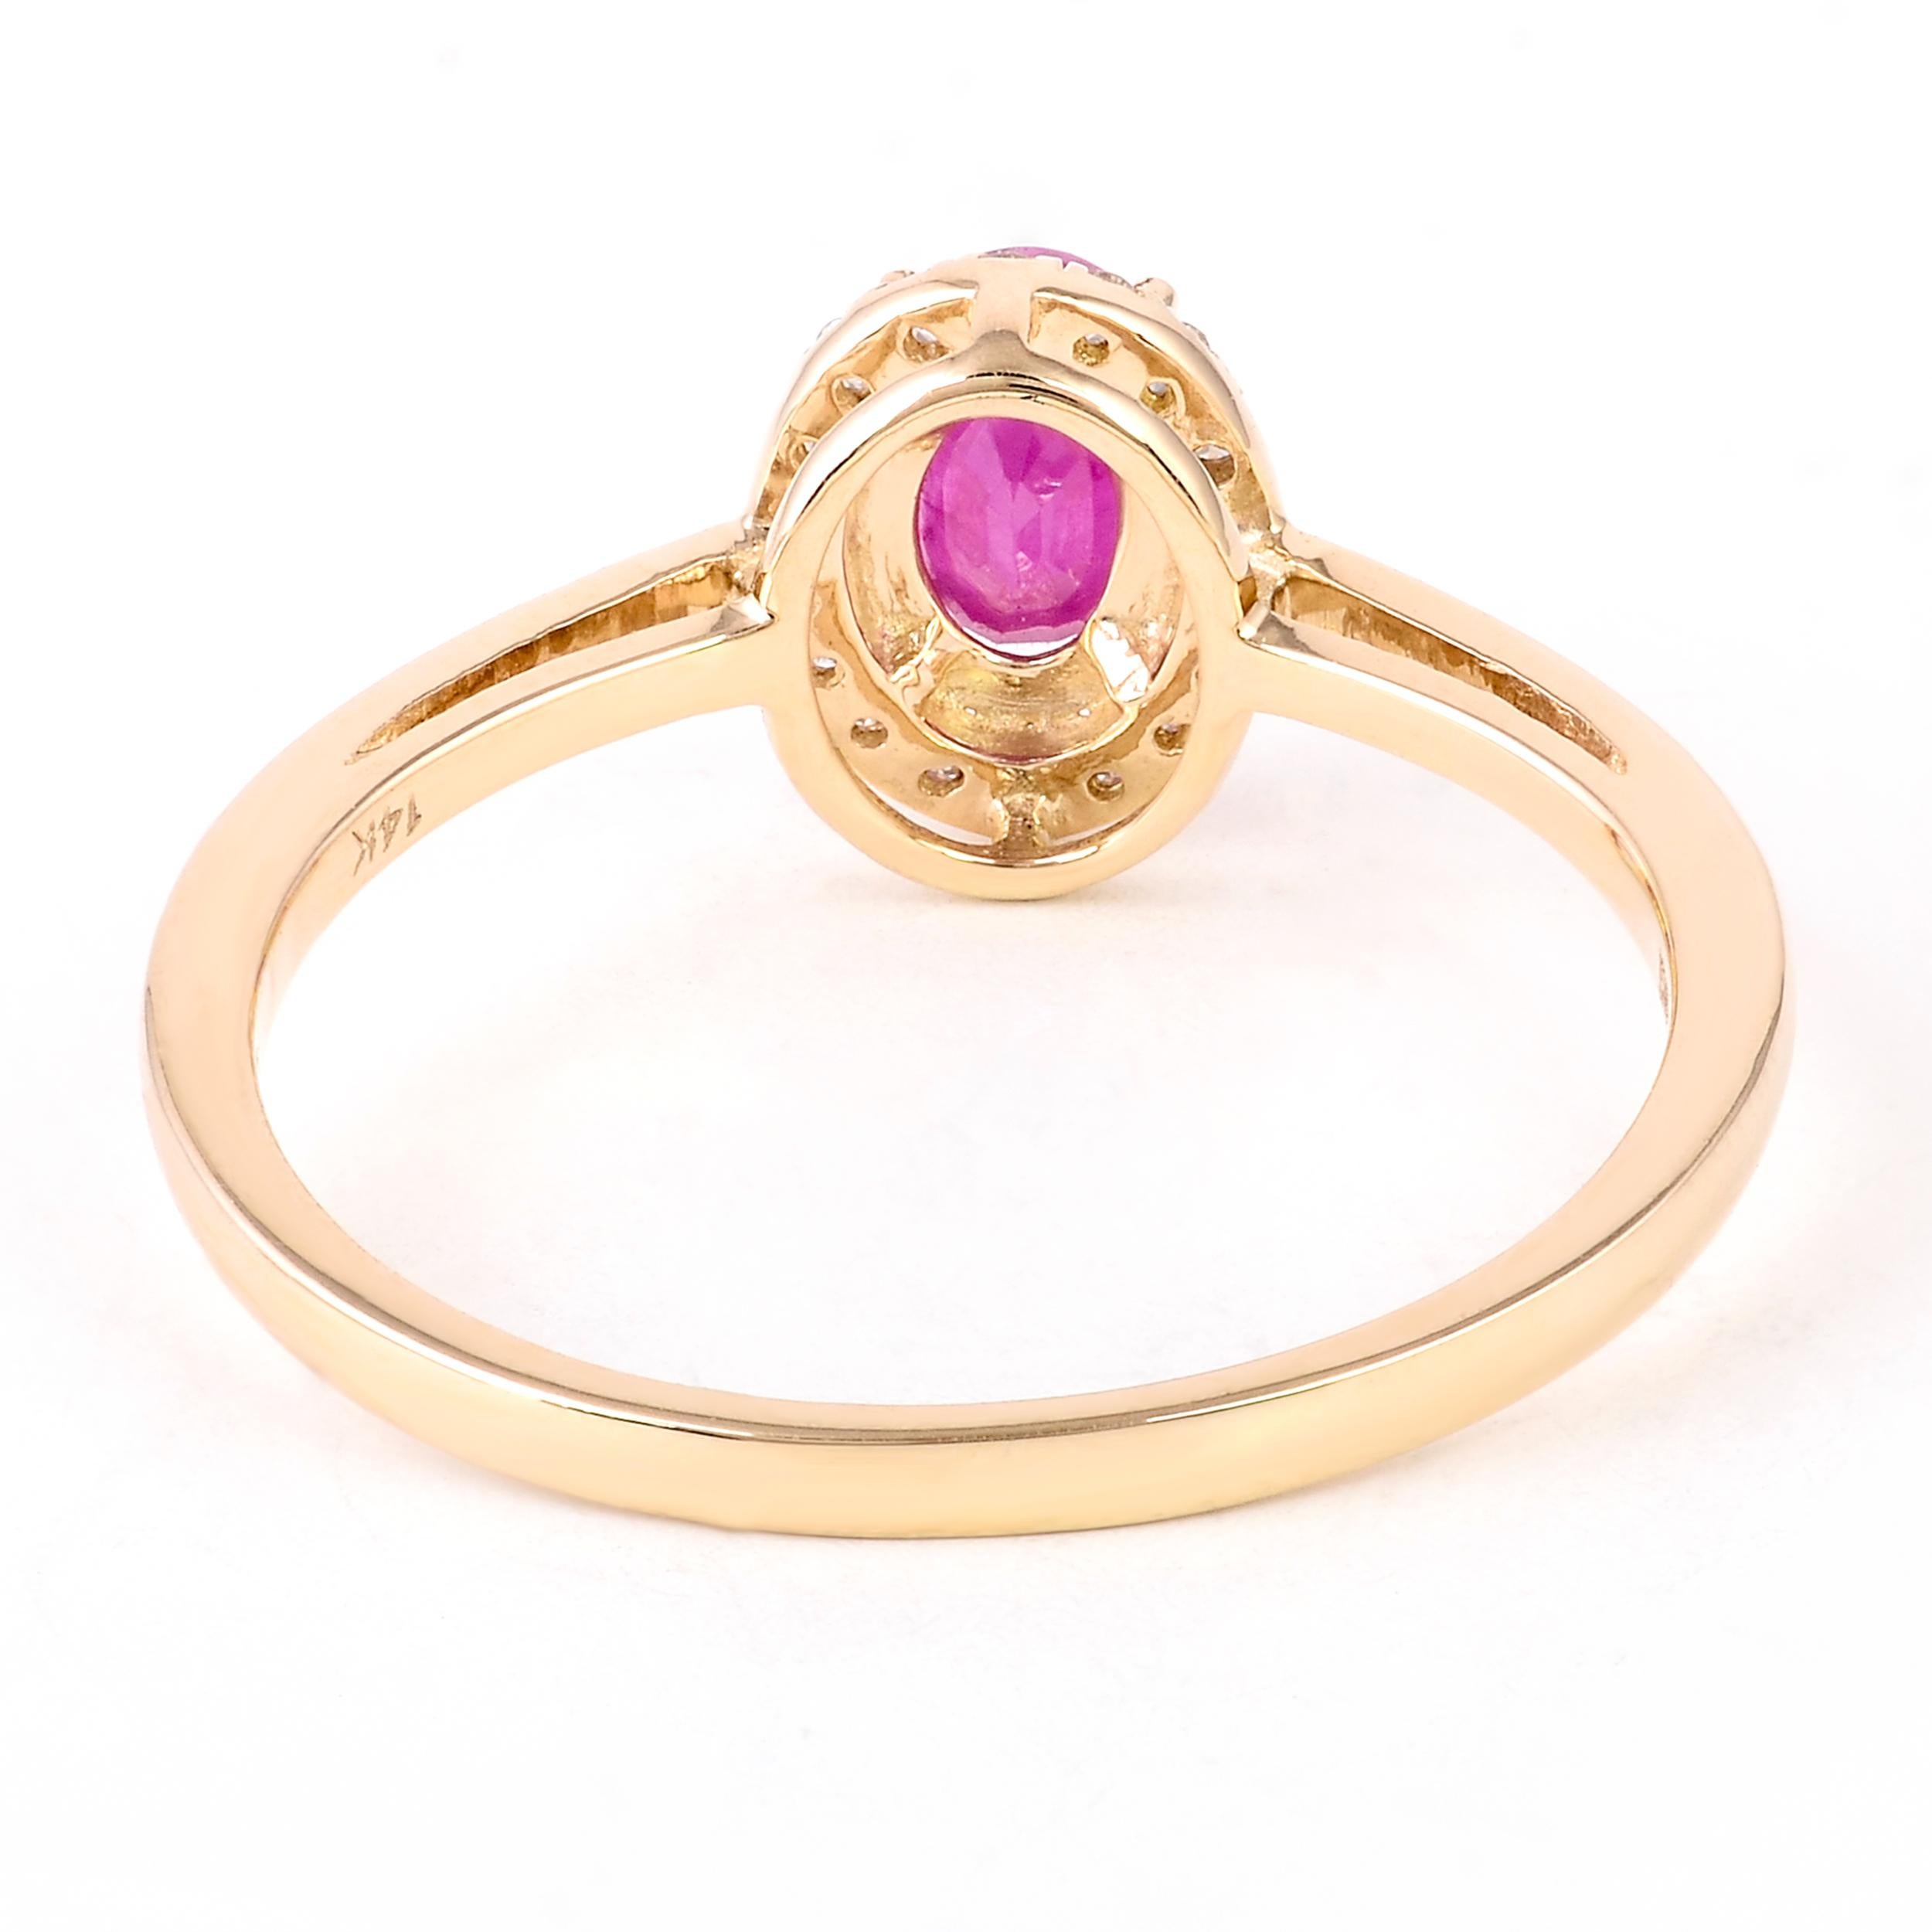 Elegant 14K Ruby & Diamond Cocktail Ring, Size 7 - Statement Jewelry Piece In New Condition For Sale In Holtsville, NY